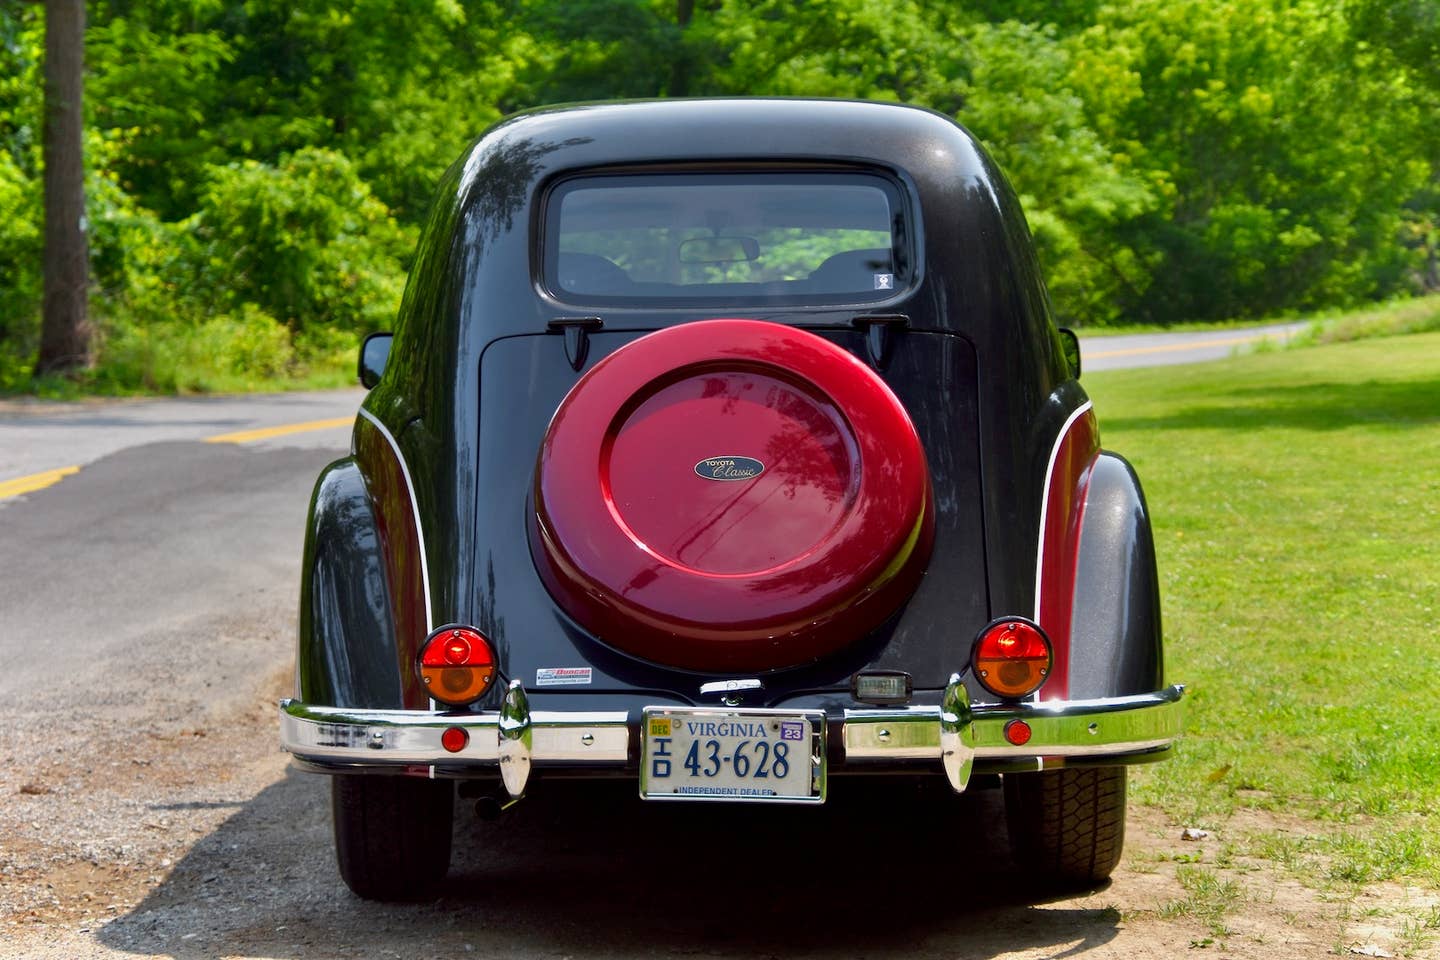 1996 Toyota Classic rear and spare tire cover